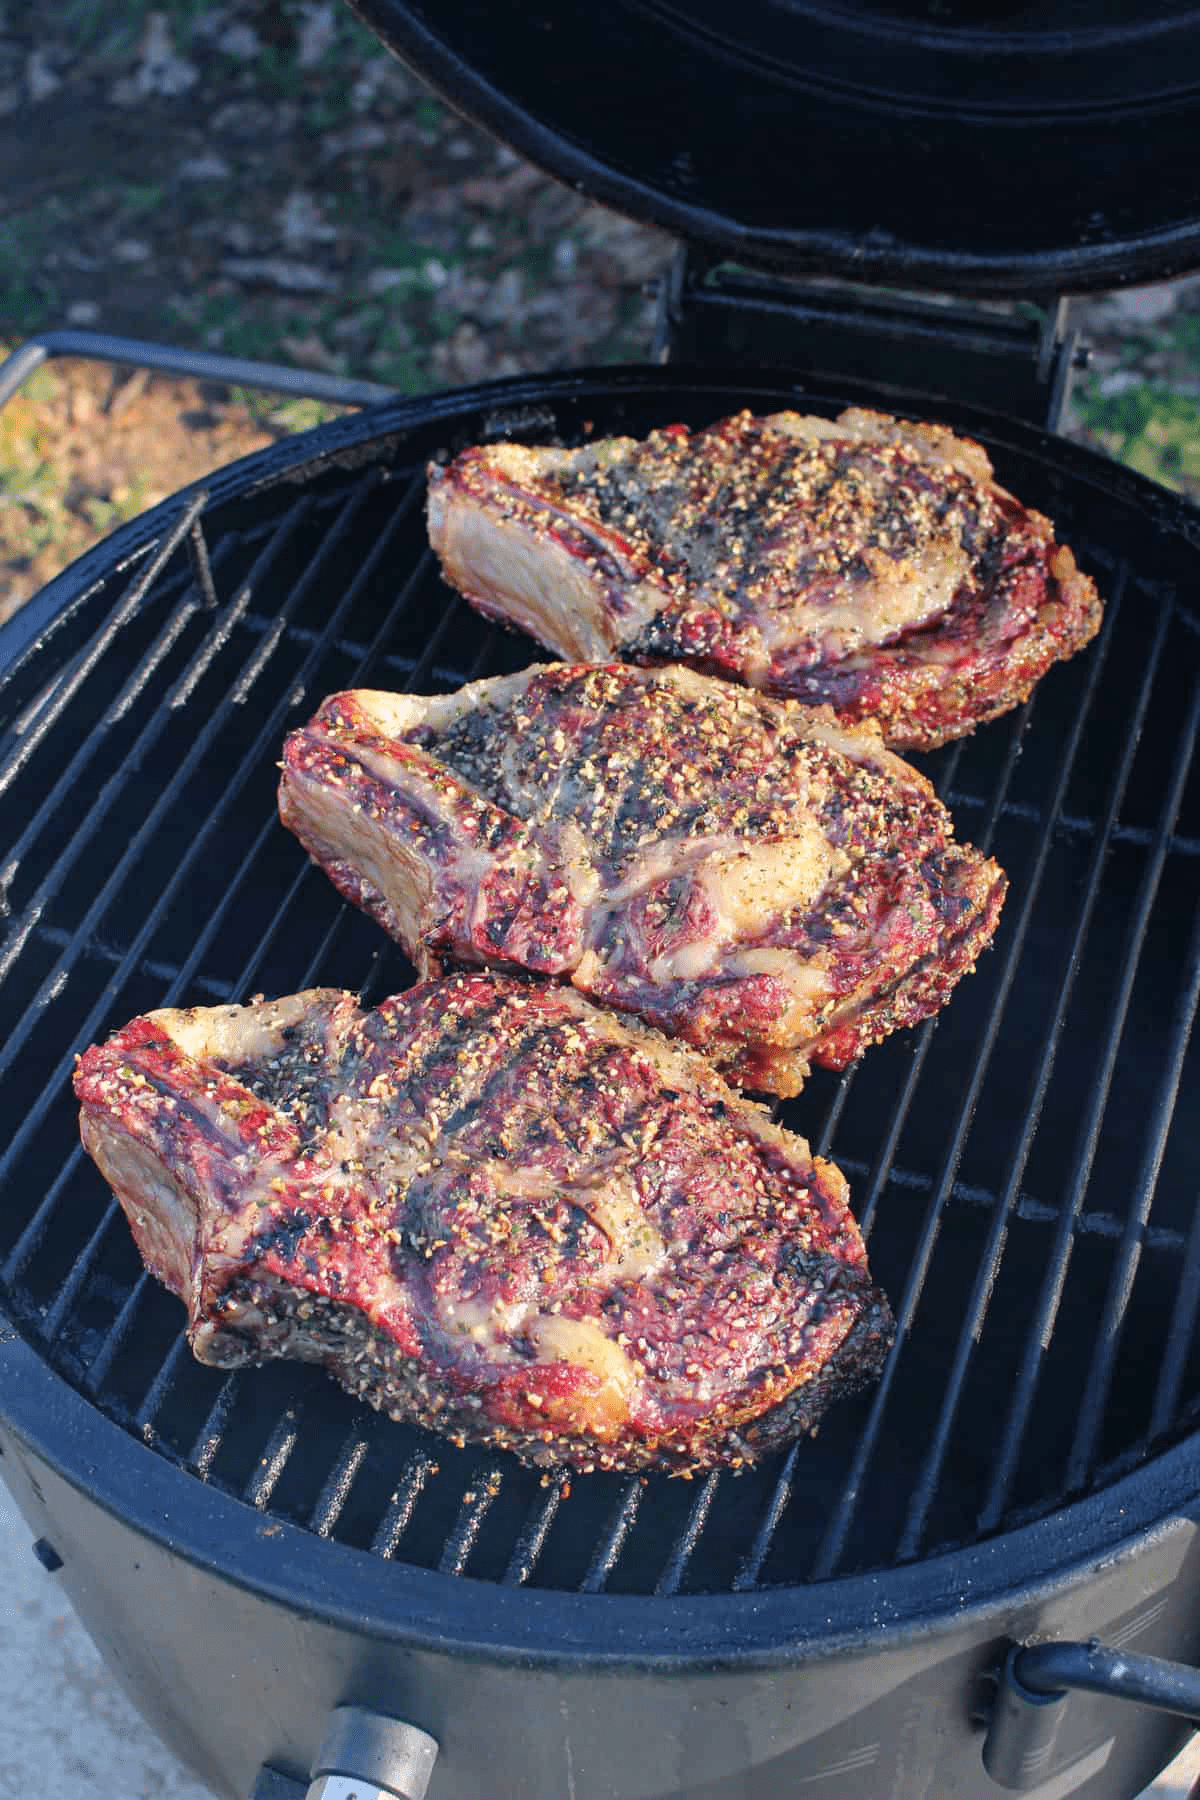 Large cut ribeyes after being smoked and ready for its sear.